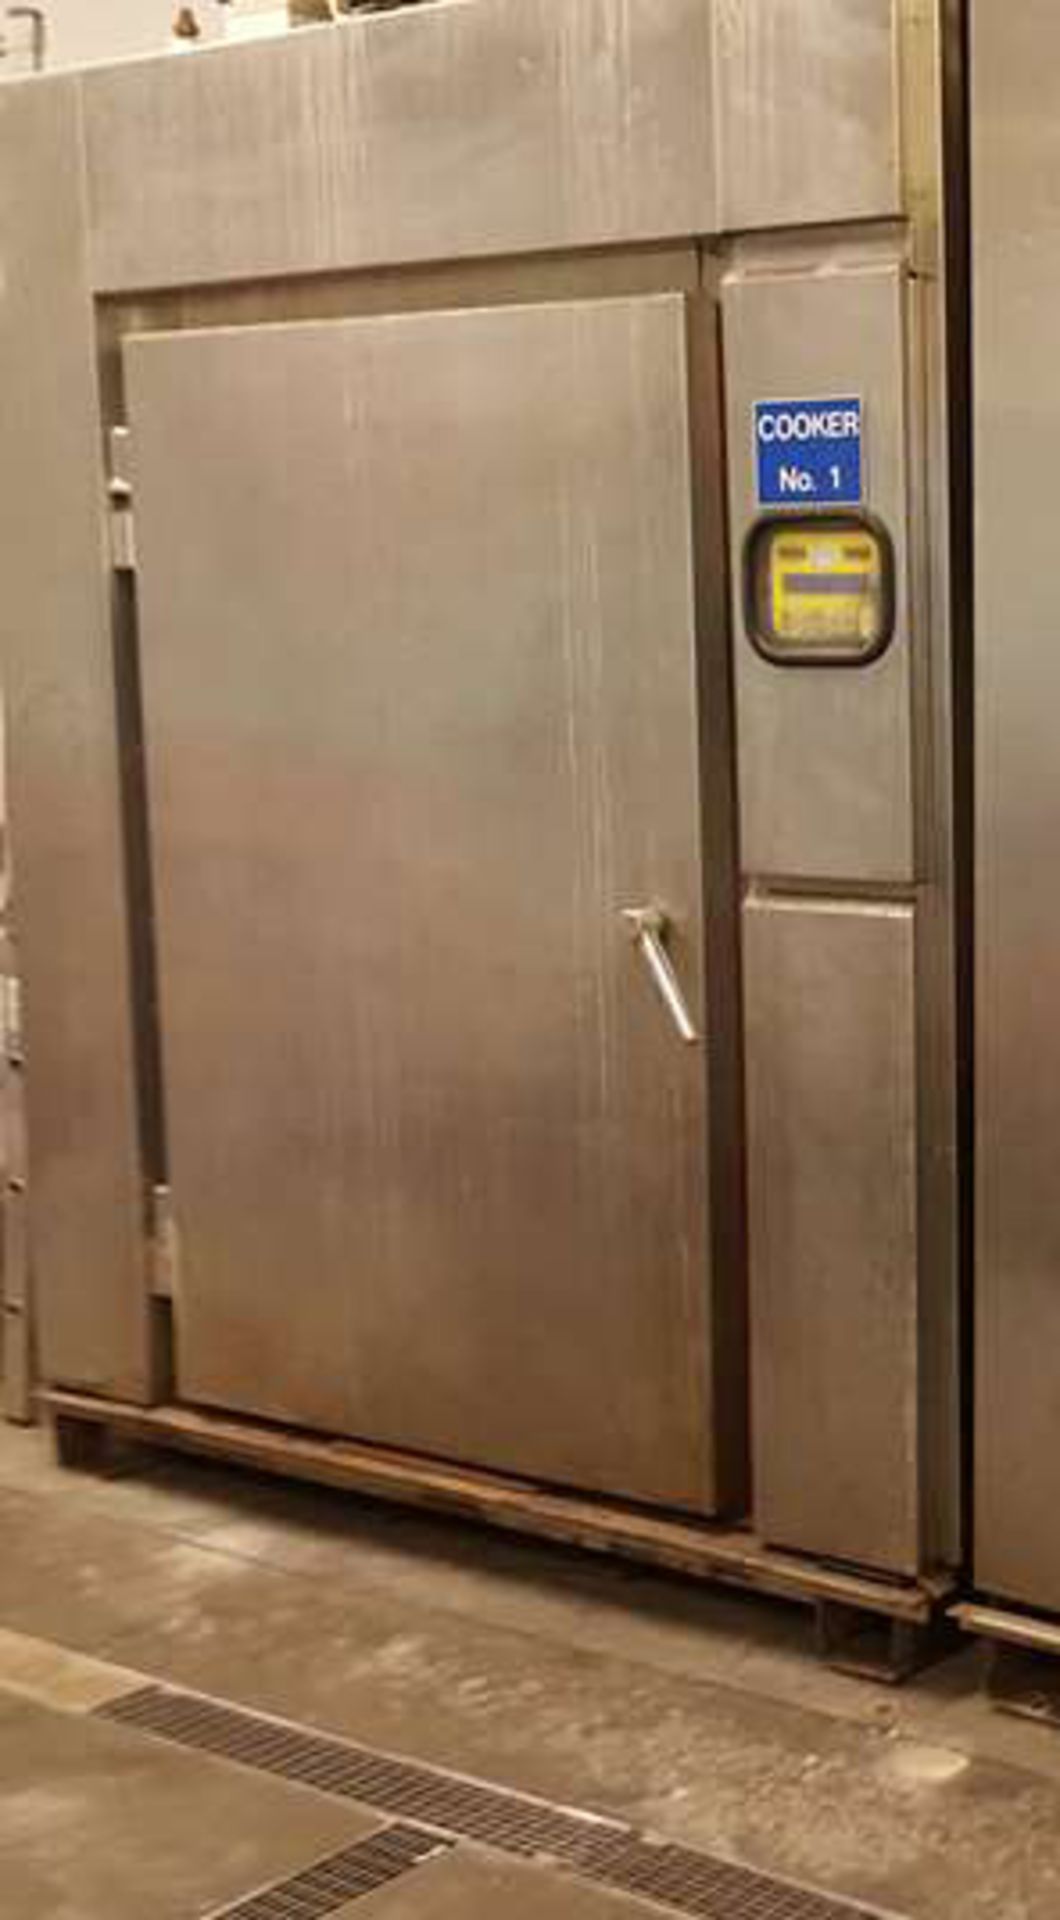 DOUBLE D STEAM OVEN